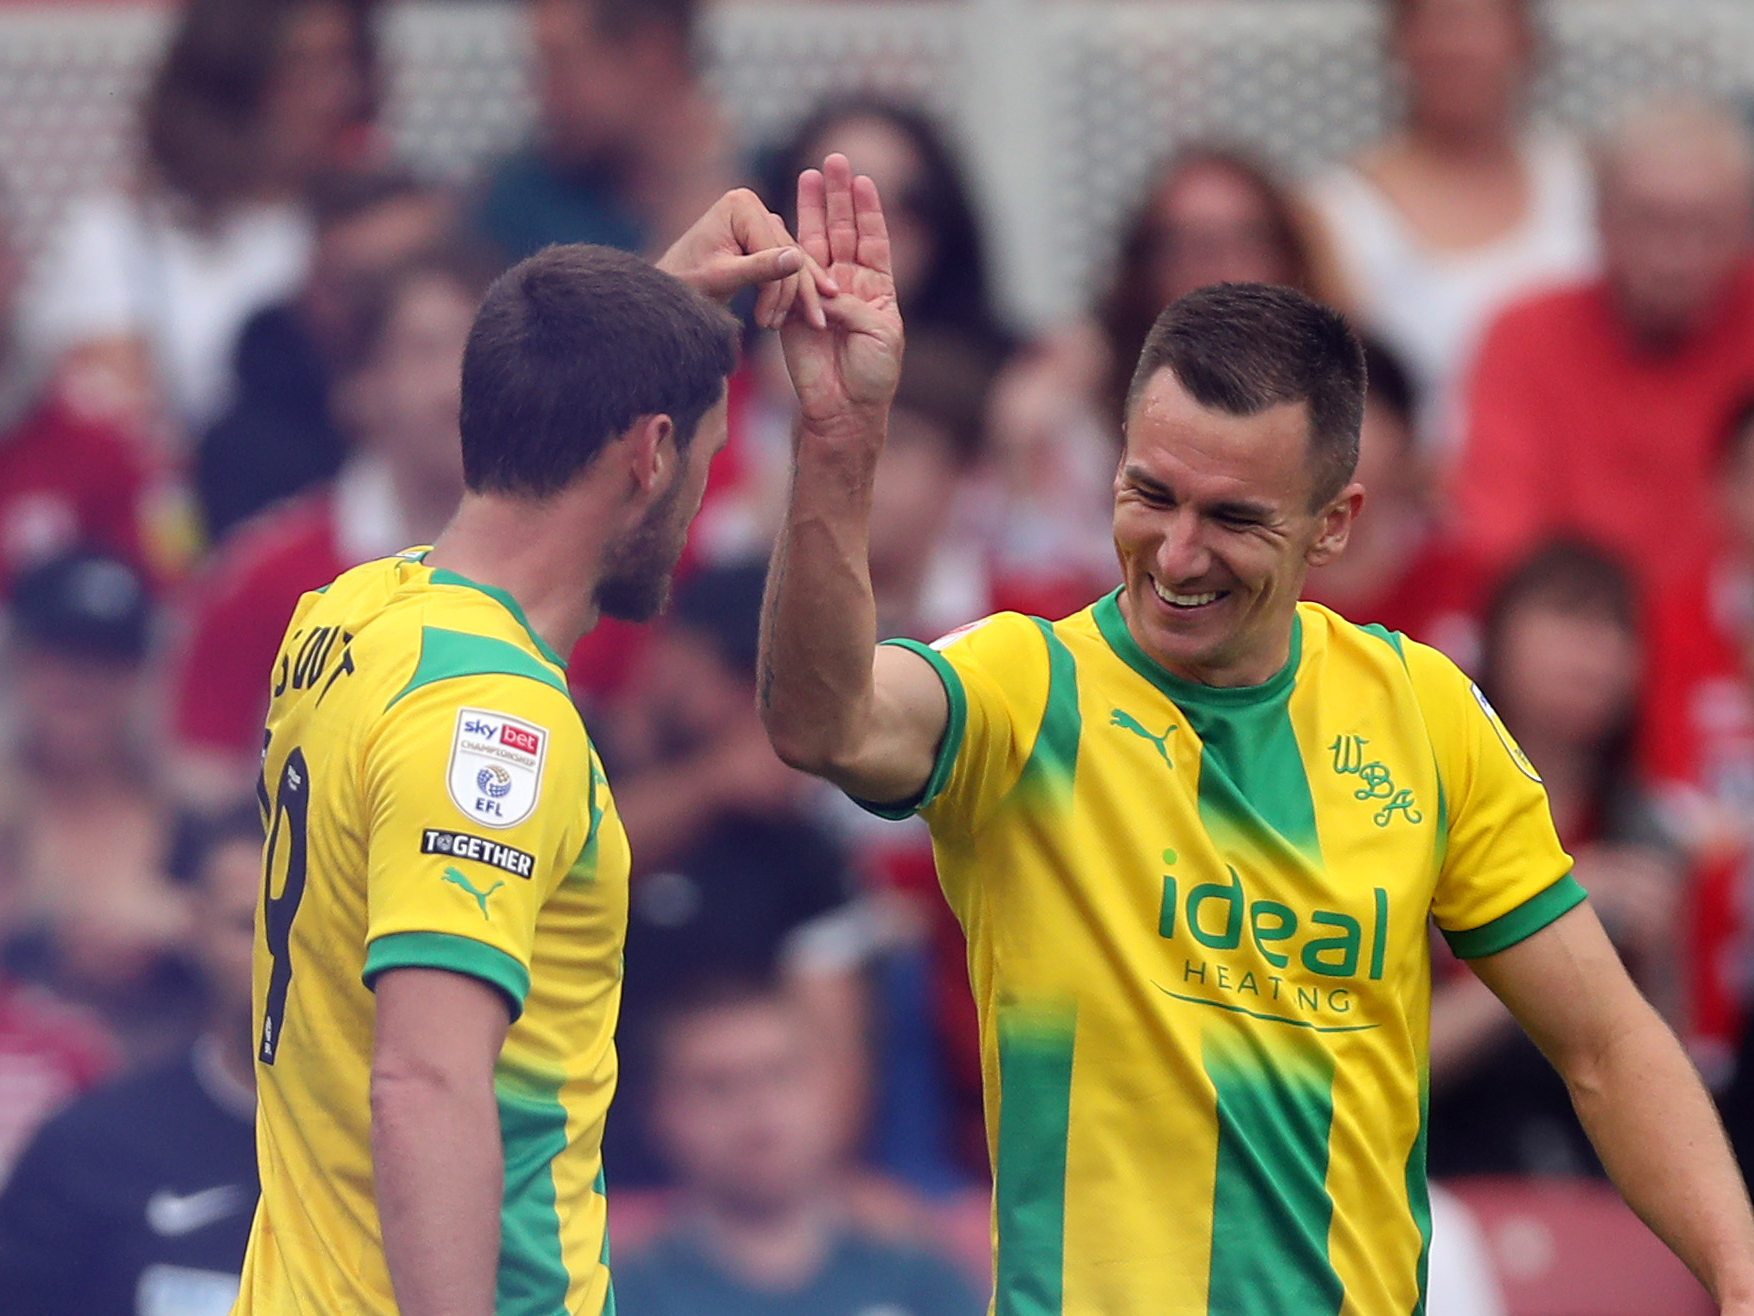 Swift and Wallace celebrate Albion's goal at Middlesbrough